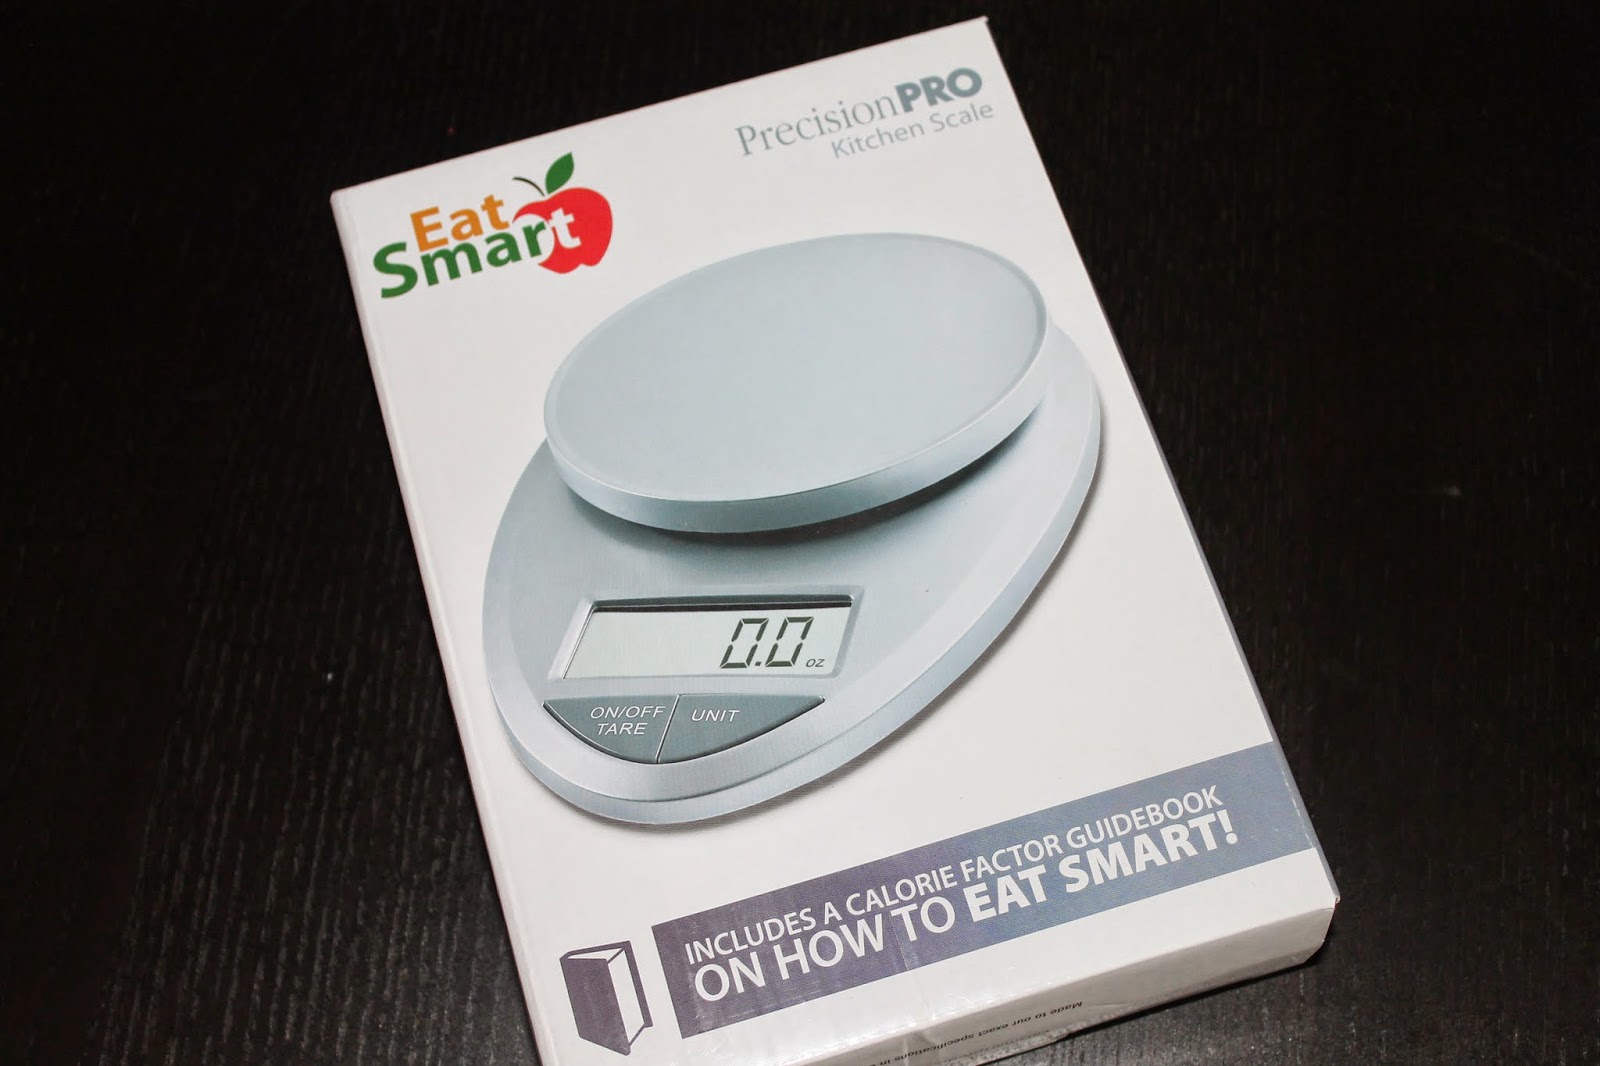 smart eating with myfitnesspal - smart kitchen scale - Smart Food